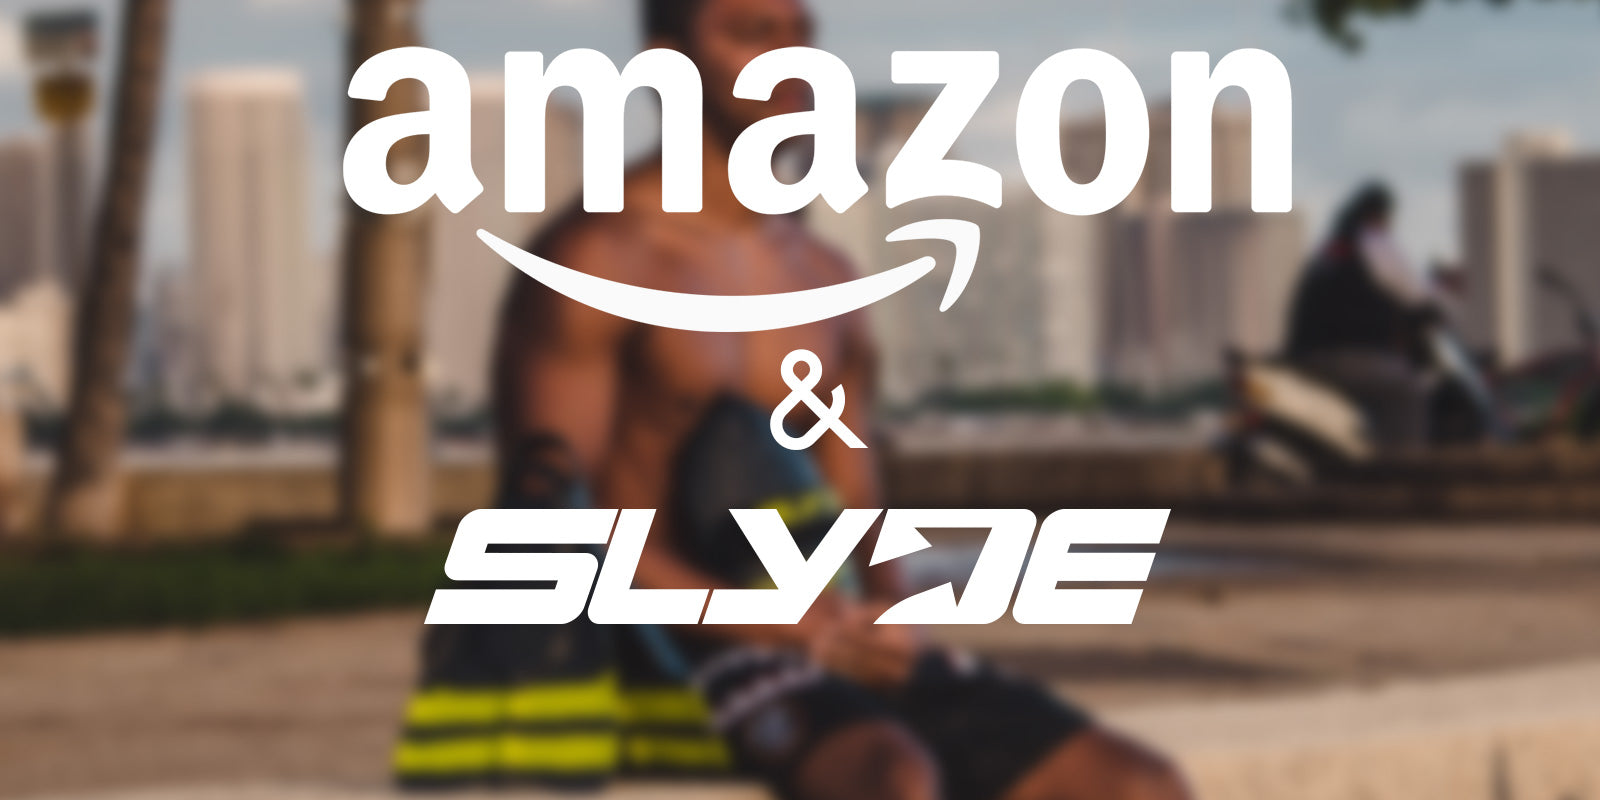 Amazon Launches New As Seen on Shark Tank Products Featuring Slyde Handboards